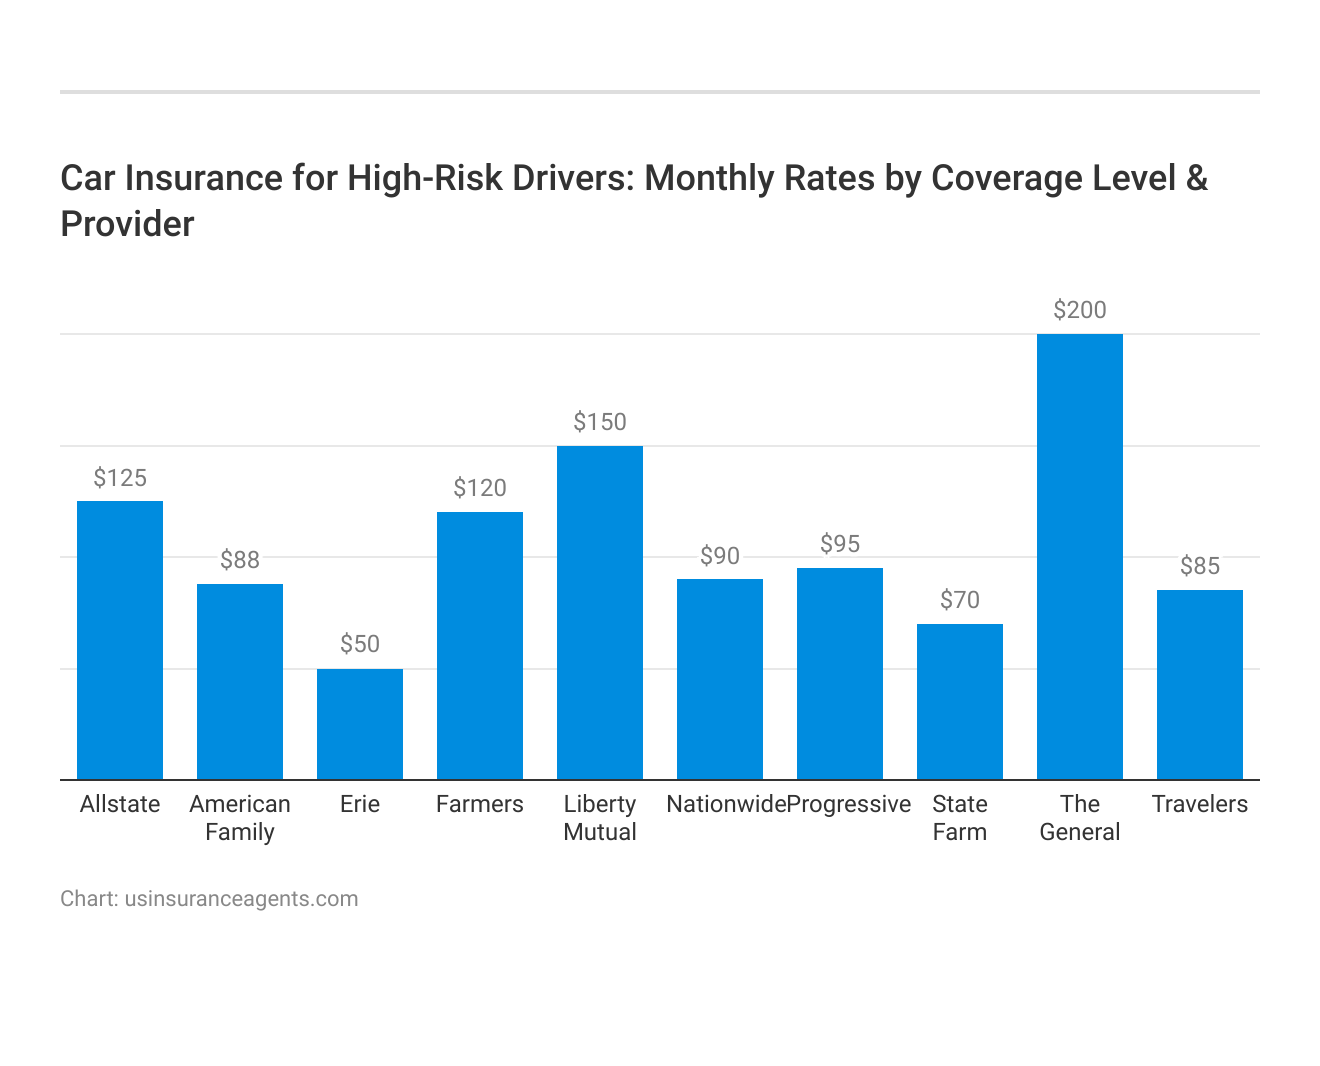 <h3>Car Insurance for High-Risk Drivers: Monthly Rates by Coverage Level & Provider</h3>